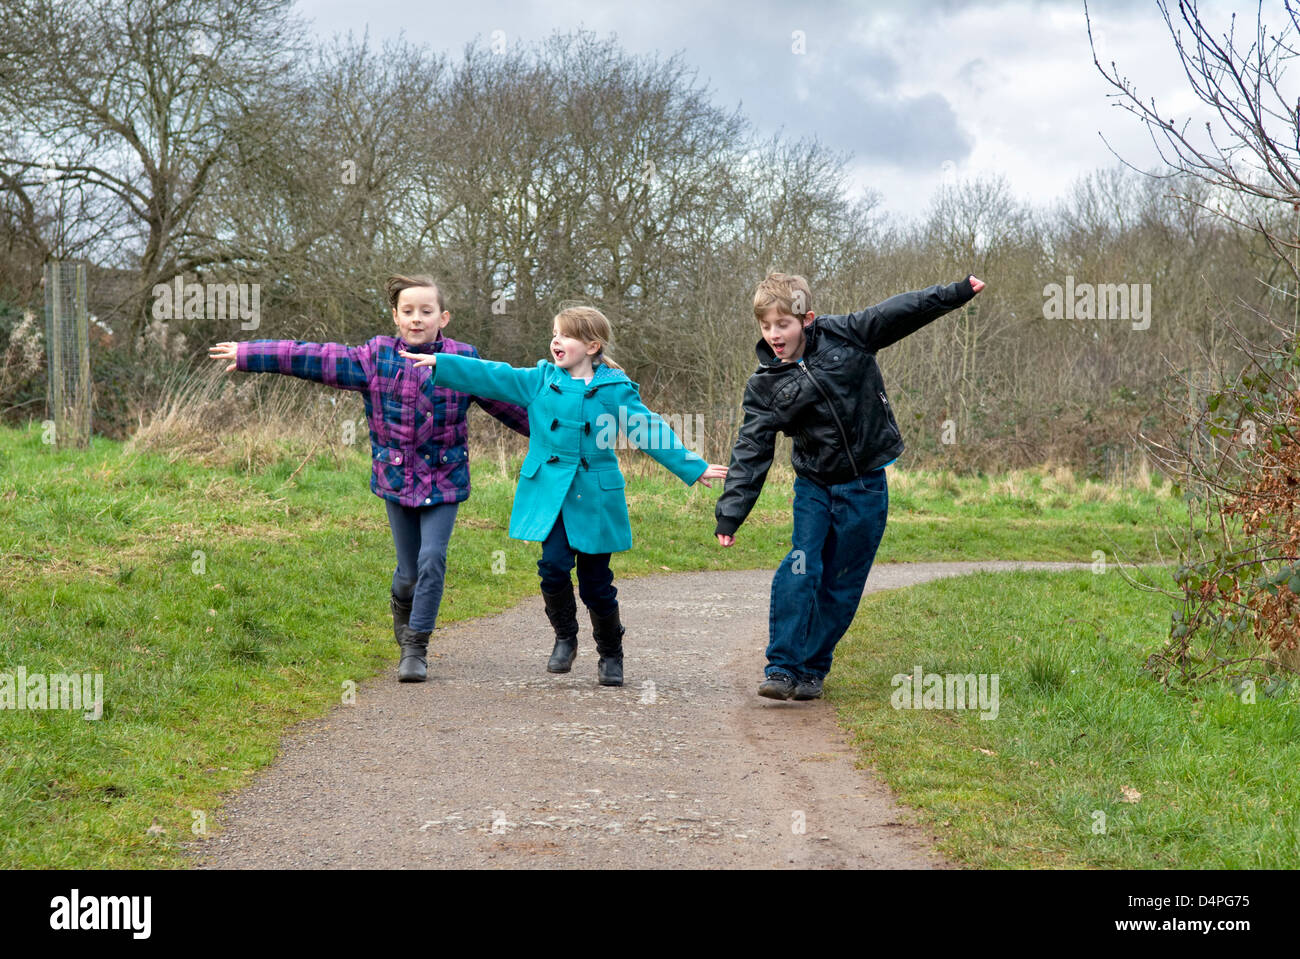 Children running making aeroplane (or airplane) shapes and having fun in park Stock Photo